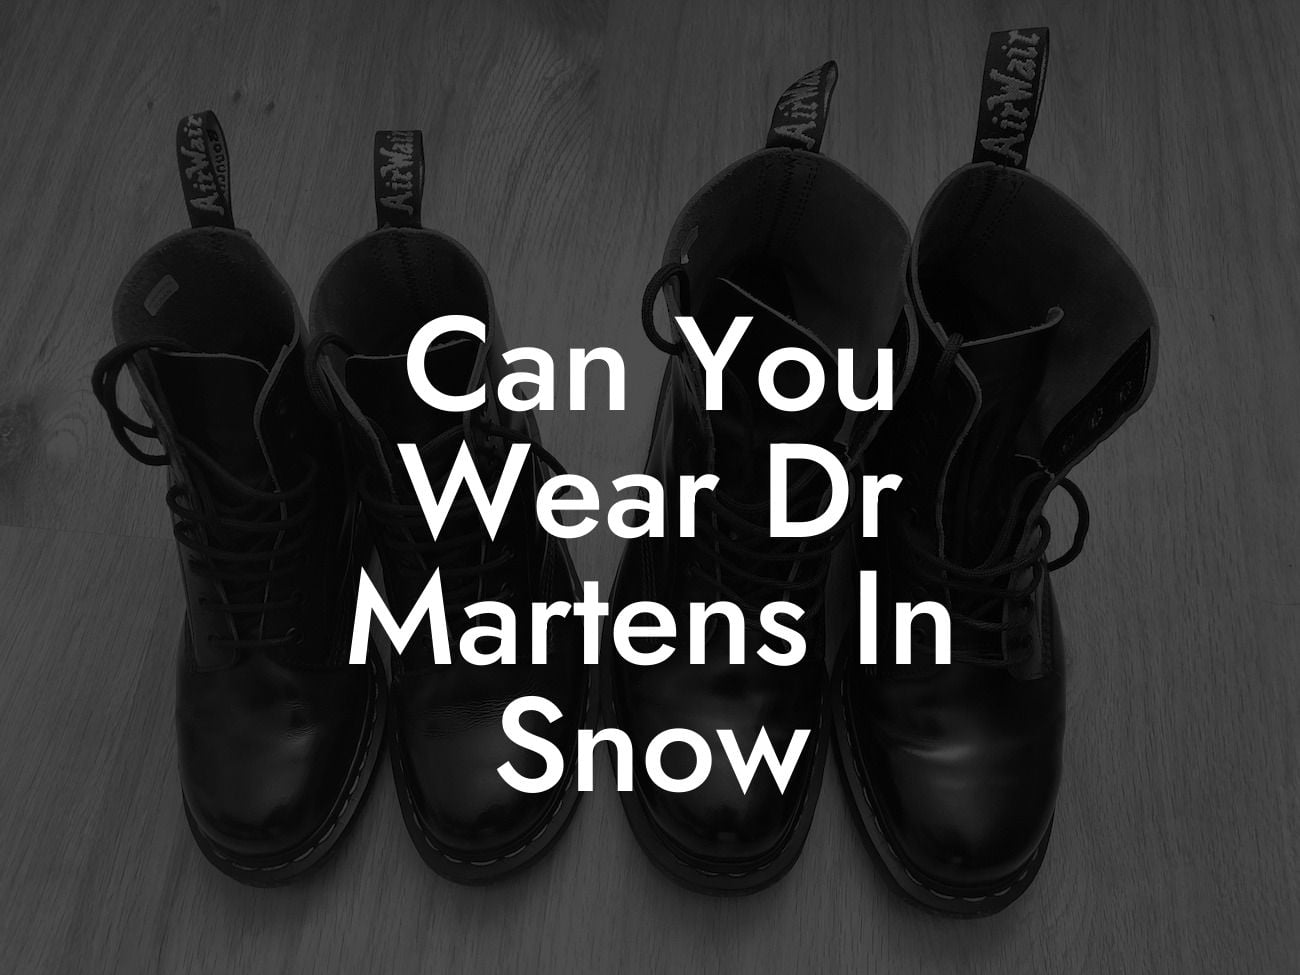 Can You Wear Dr Martens In Snow